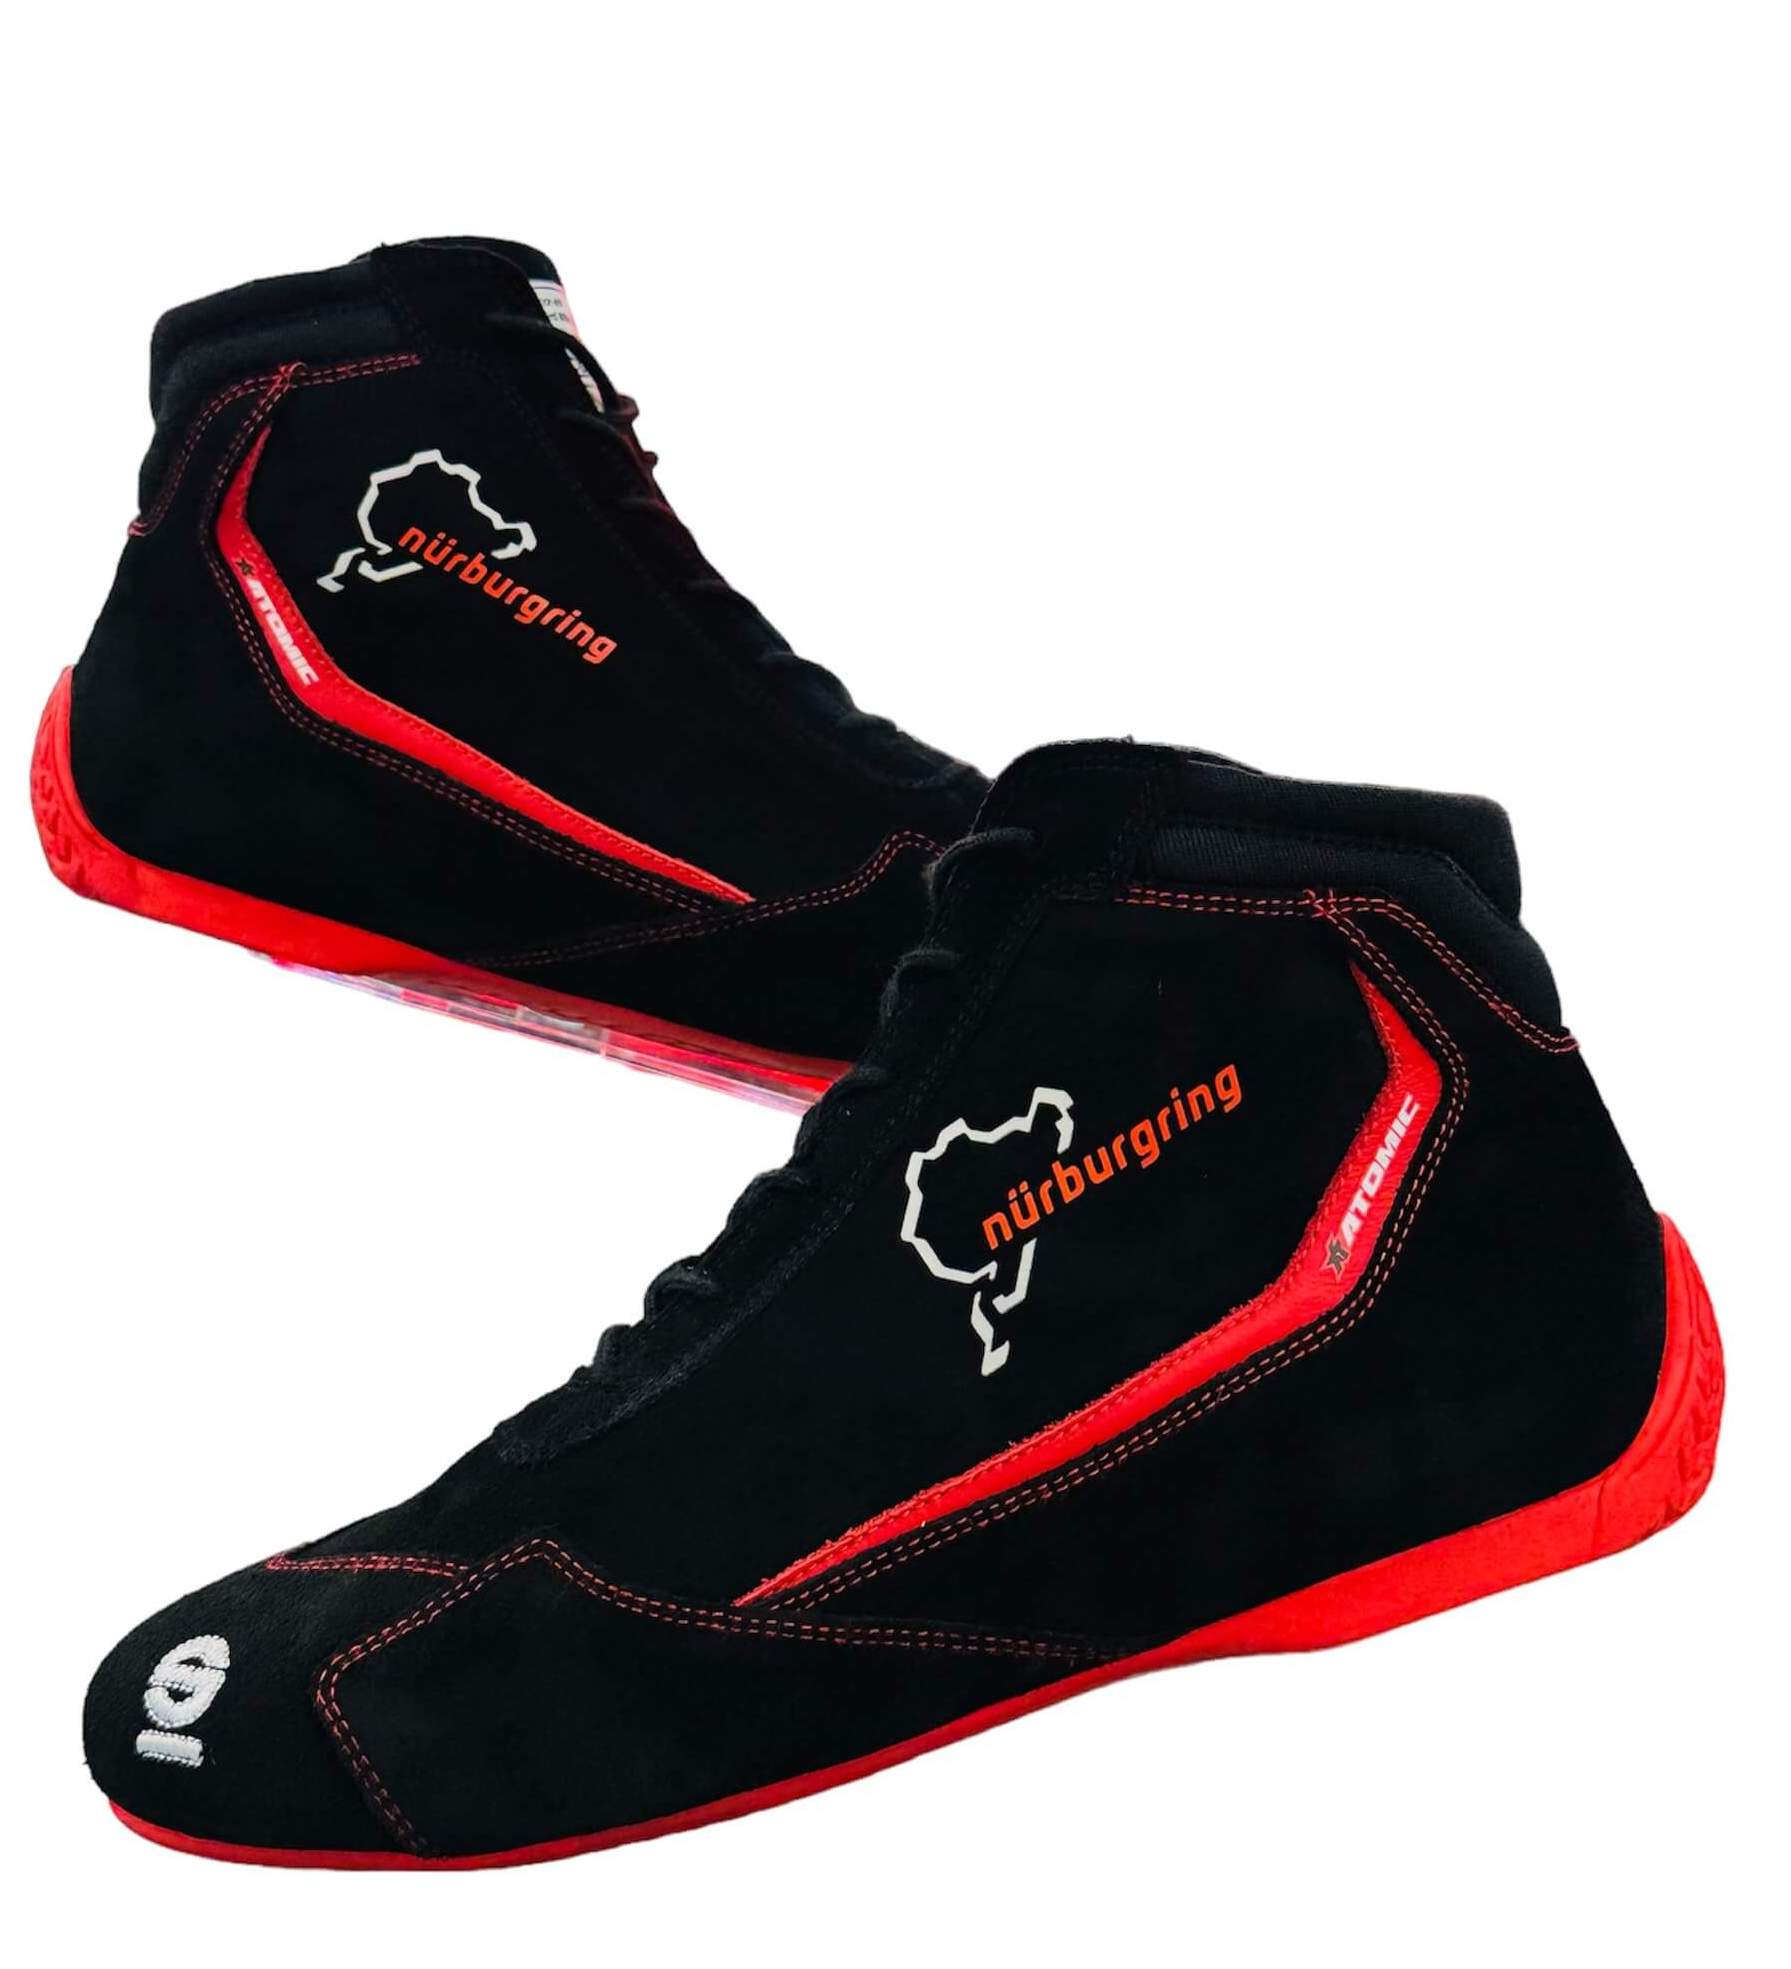 SPARCO 001295SP_NBR47 Shoes Slalom Nurburgring Edition black/red Size 47 Photo-3 